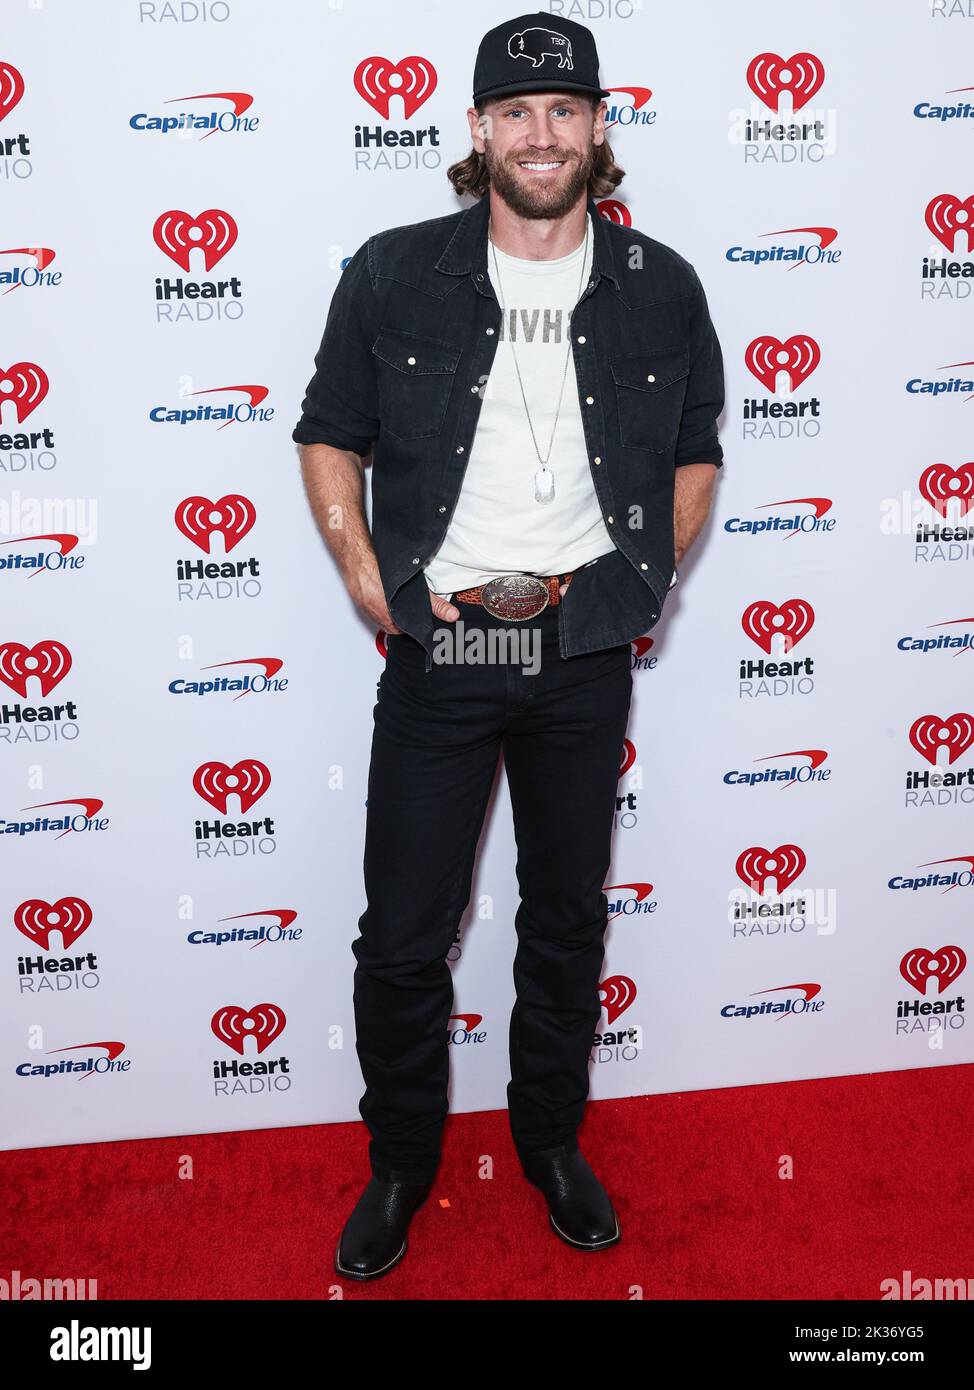 LAS VEGAS, NEVADA, USA - SEPTEMBER 24: Chase Rice poses in the press room at the 2022 iHeartRadio Music Festival - Night 2 held at the T-Mobile Arena on September 24, 2022 in Las Vegas, Nevada, United States. (Photo by Xavier Collin/Image Press Agency) Stock Photo